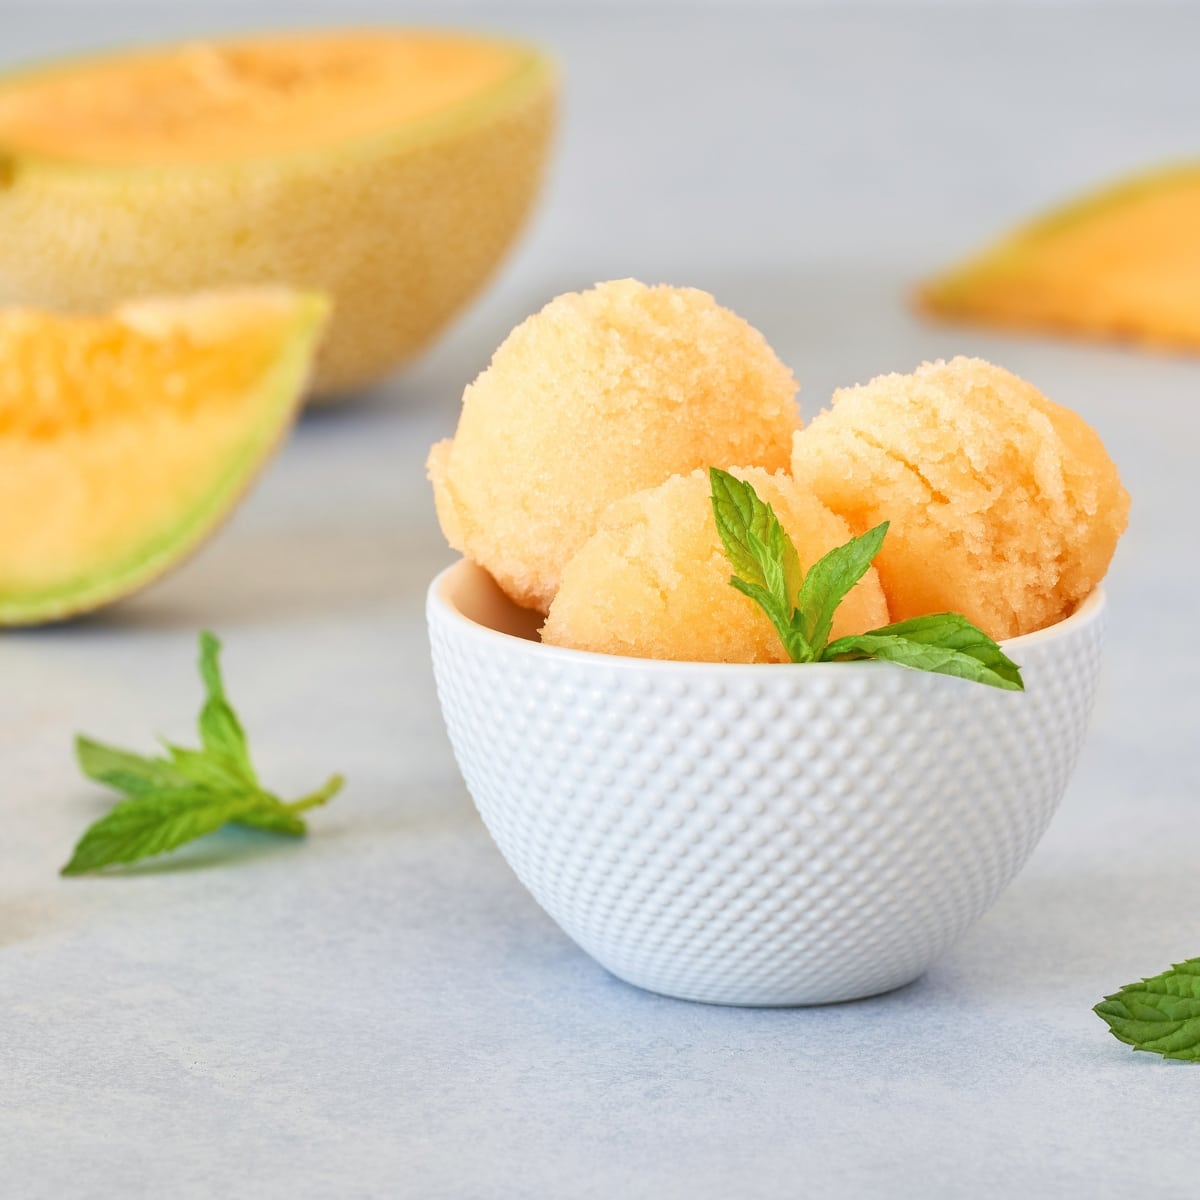 Melon Sorbet Scoops on a  Bowl